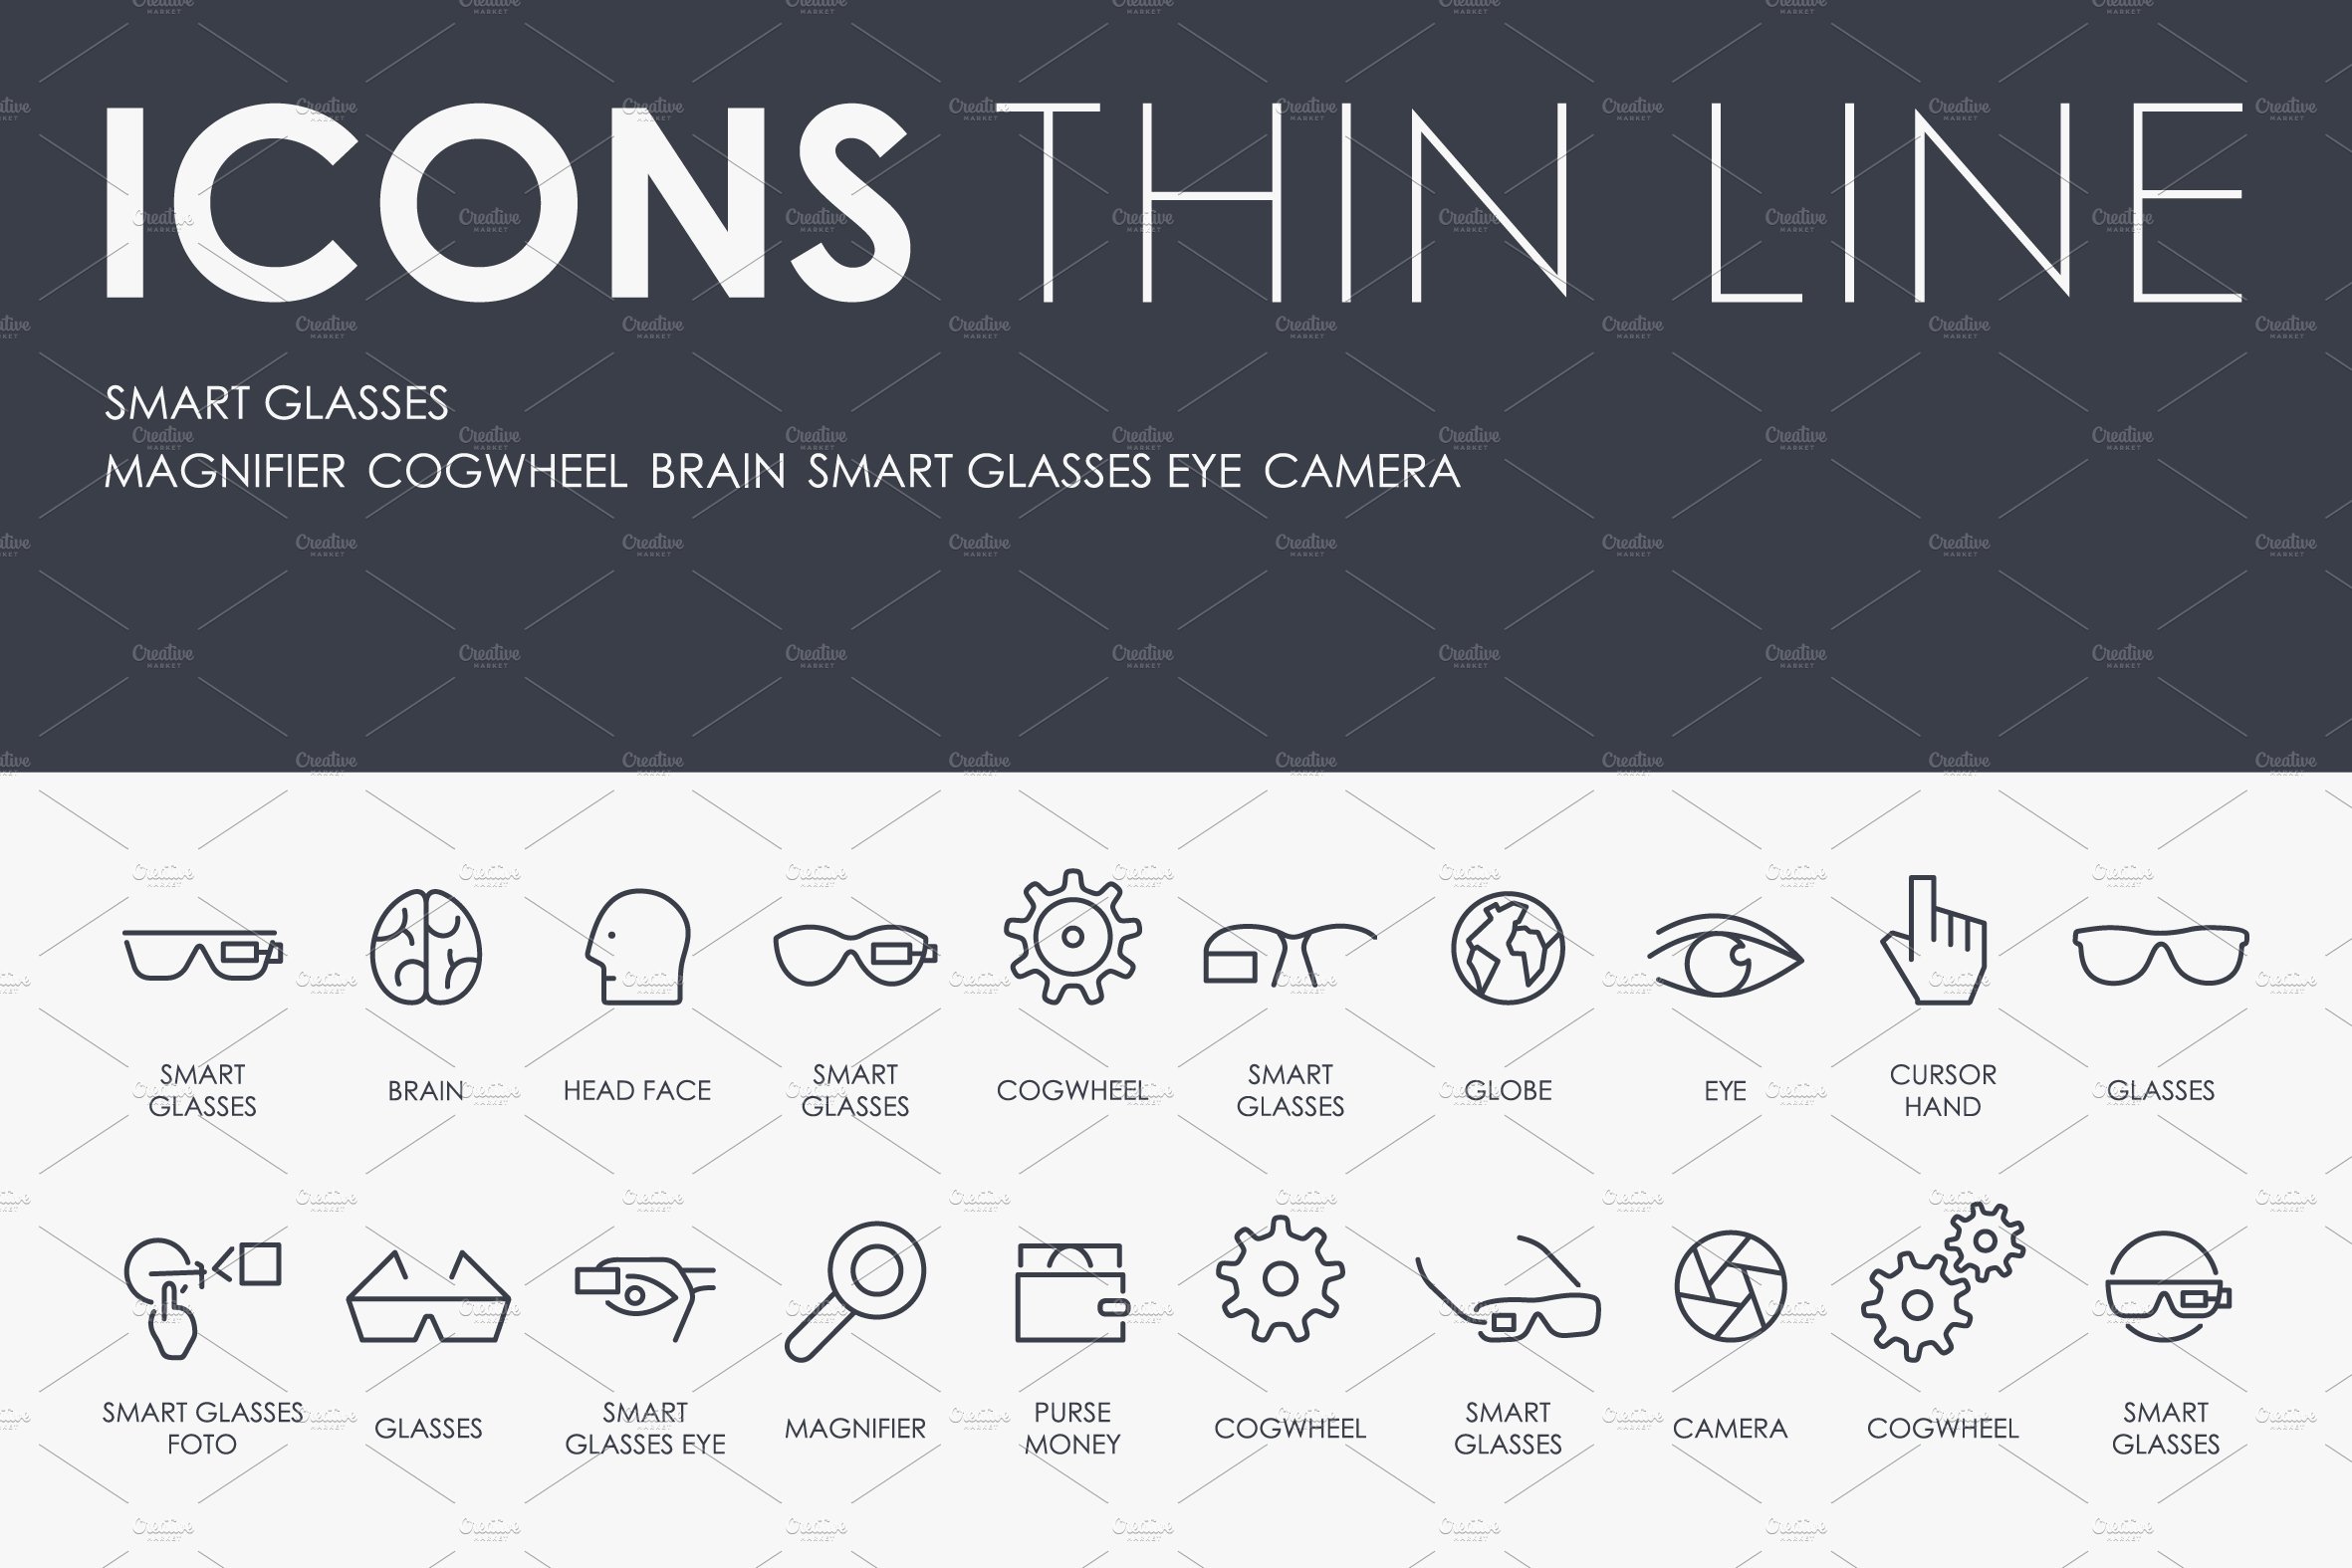 Smart glasses thinline icons cover image.